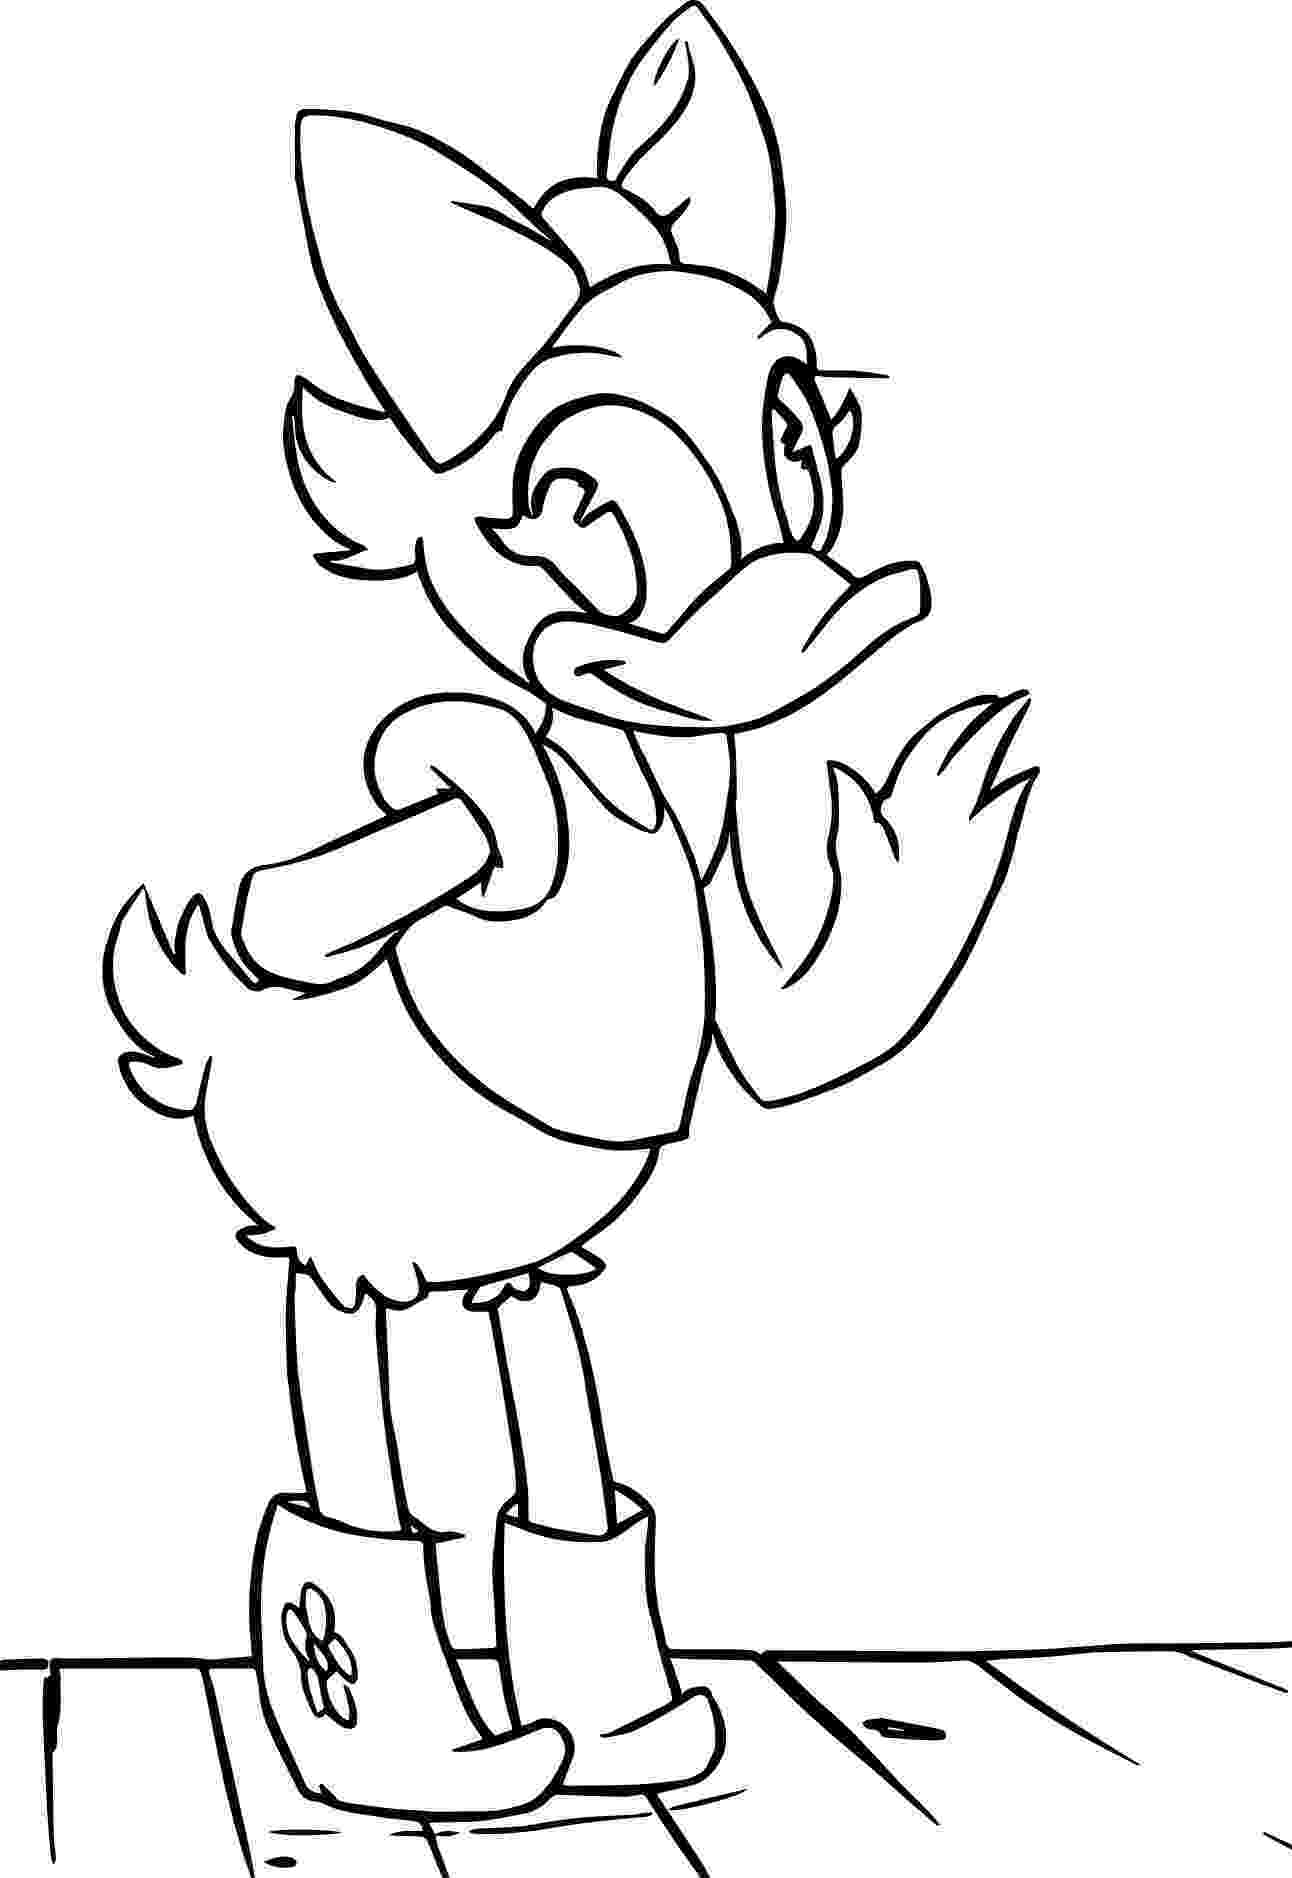 daisy duck template daisy duck face pages coloring pages template duck daisy 